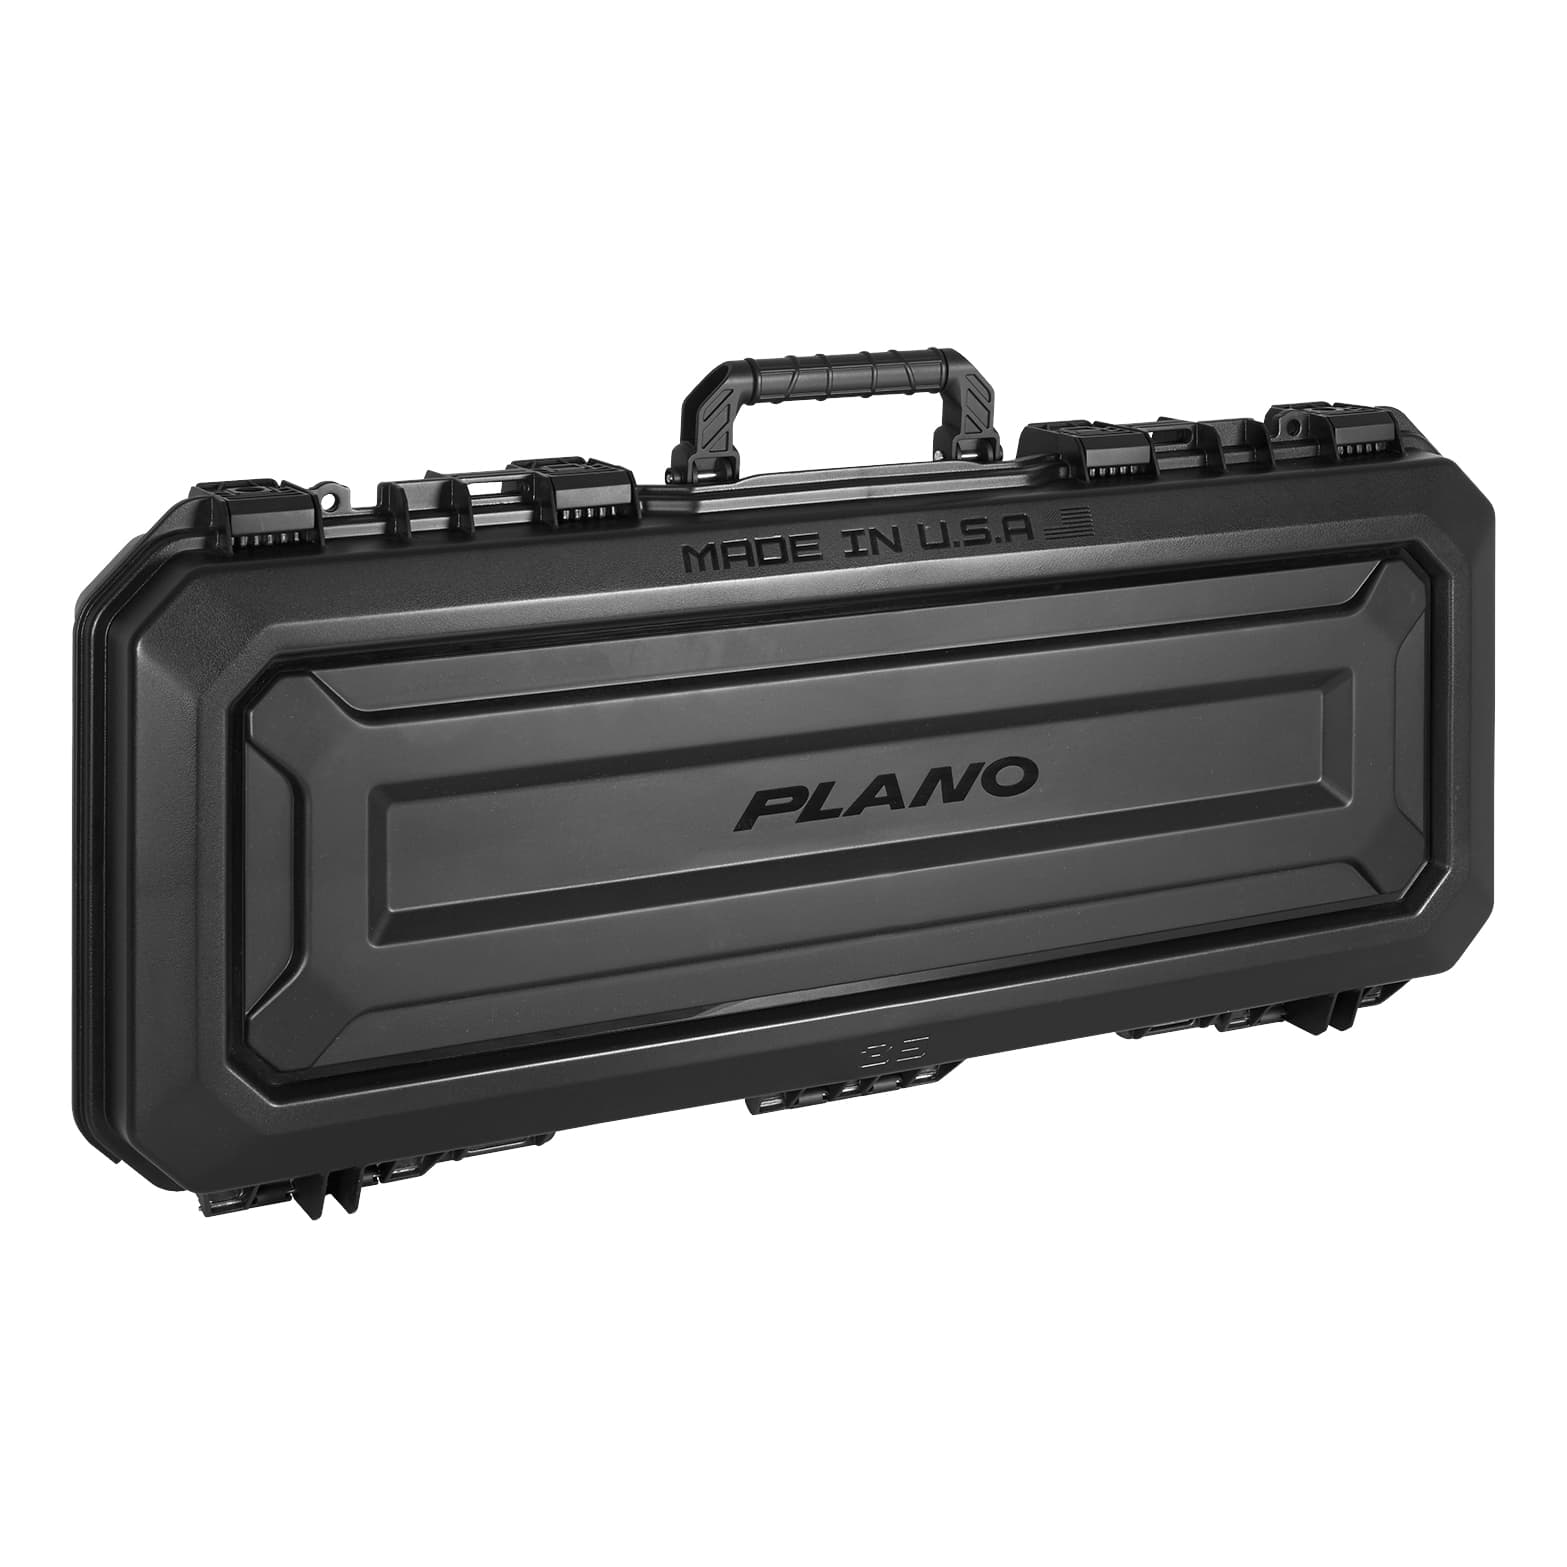 Fishing Storage and Hunting Storage from Plano. Protect Your Passion. -  Plano